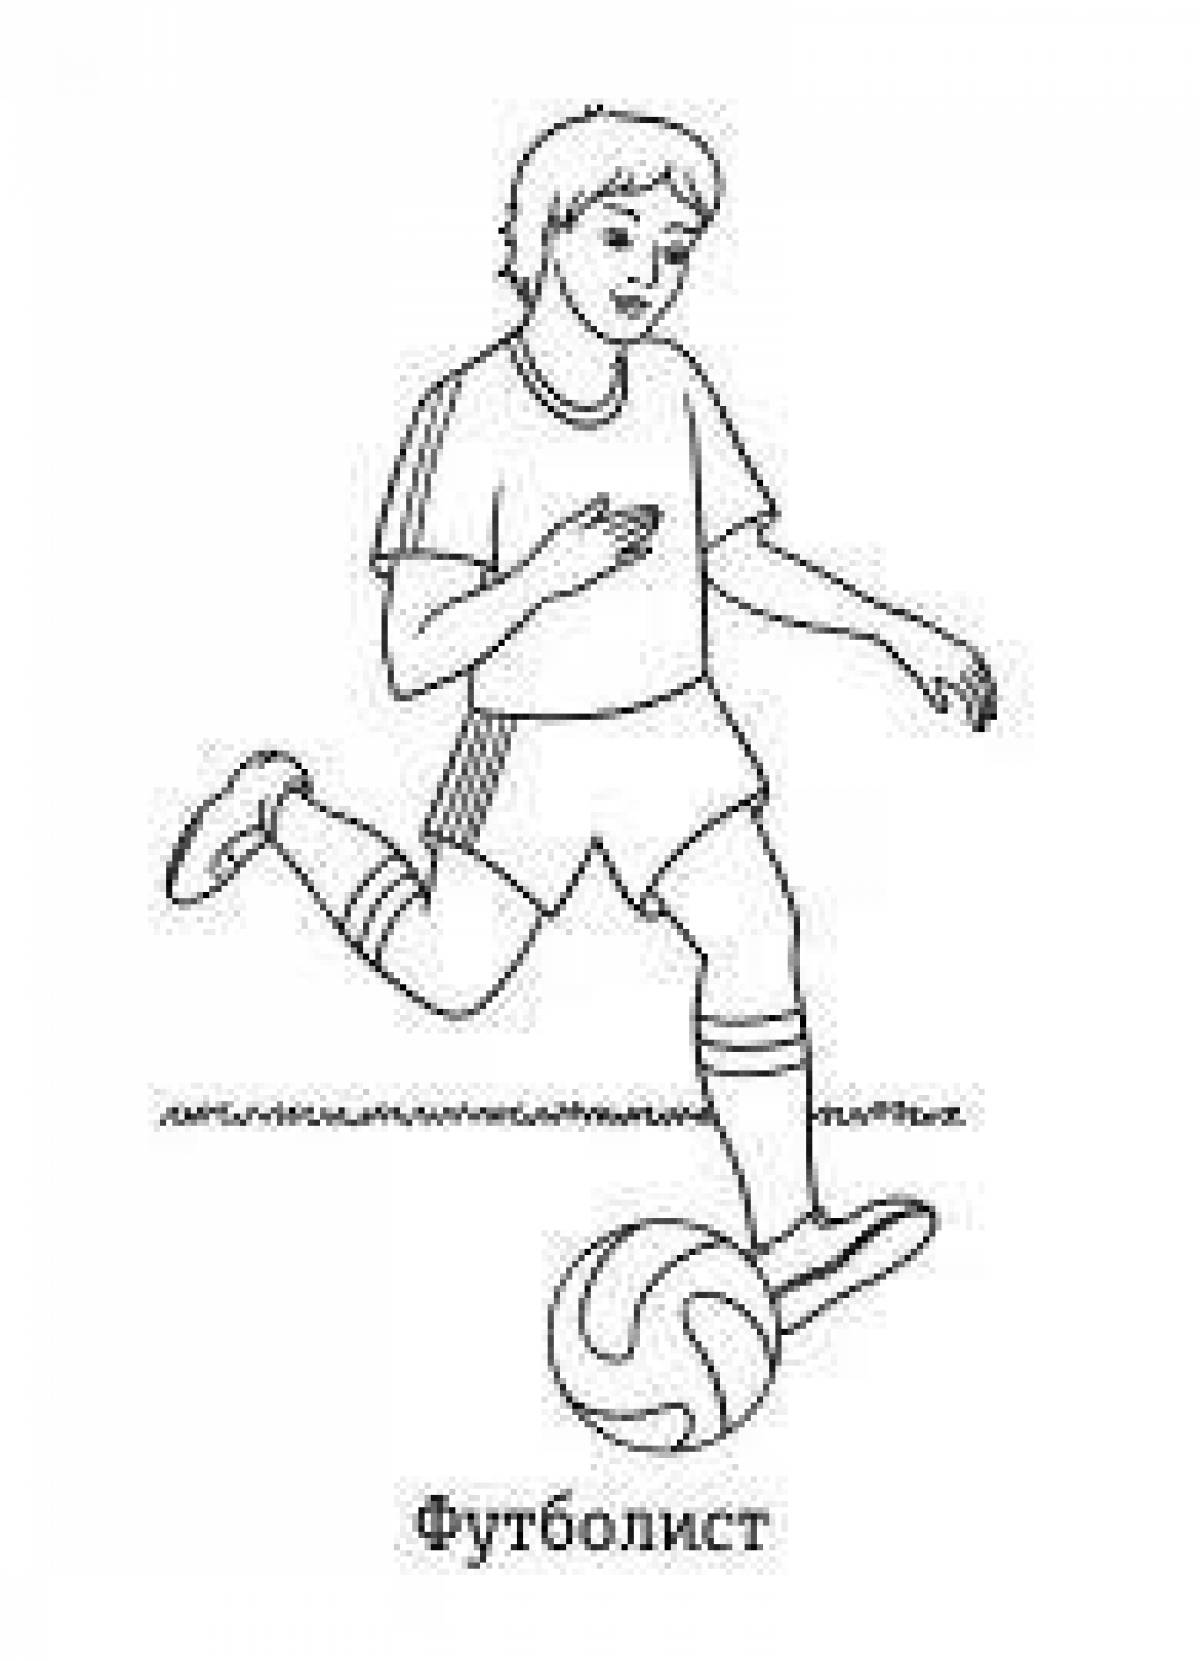 Energetic soccer player with a ball